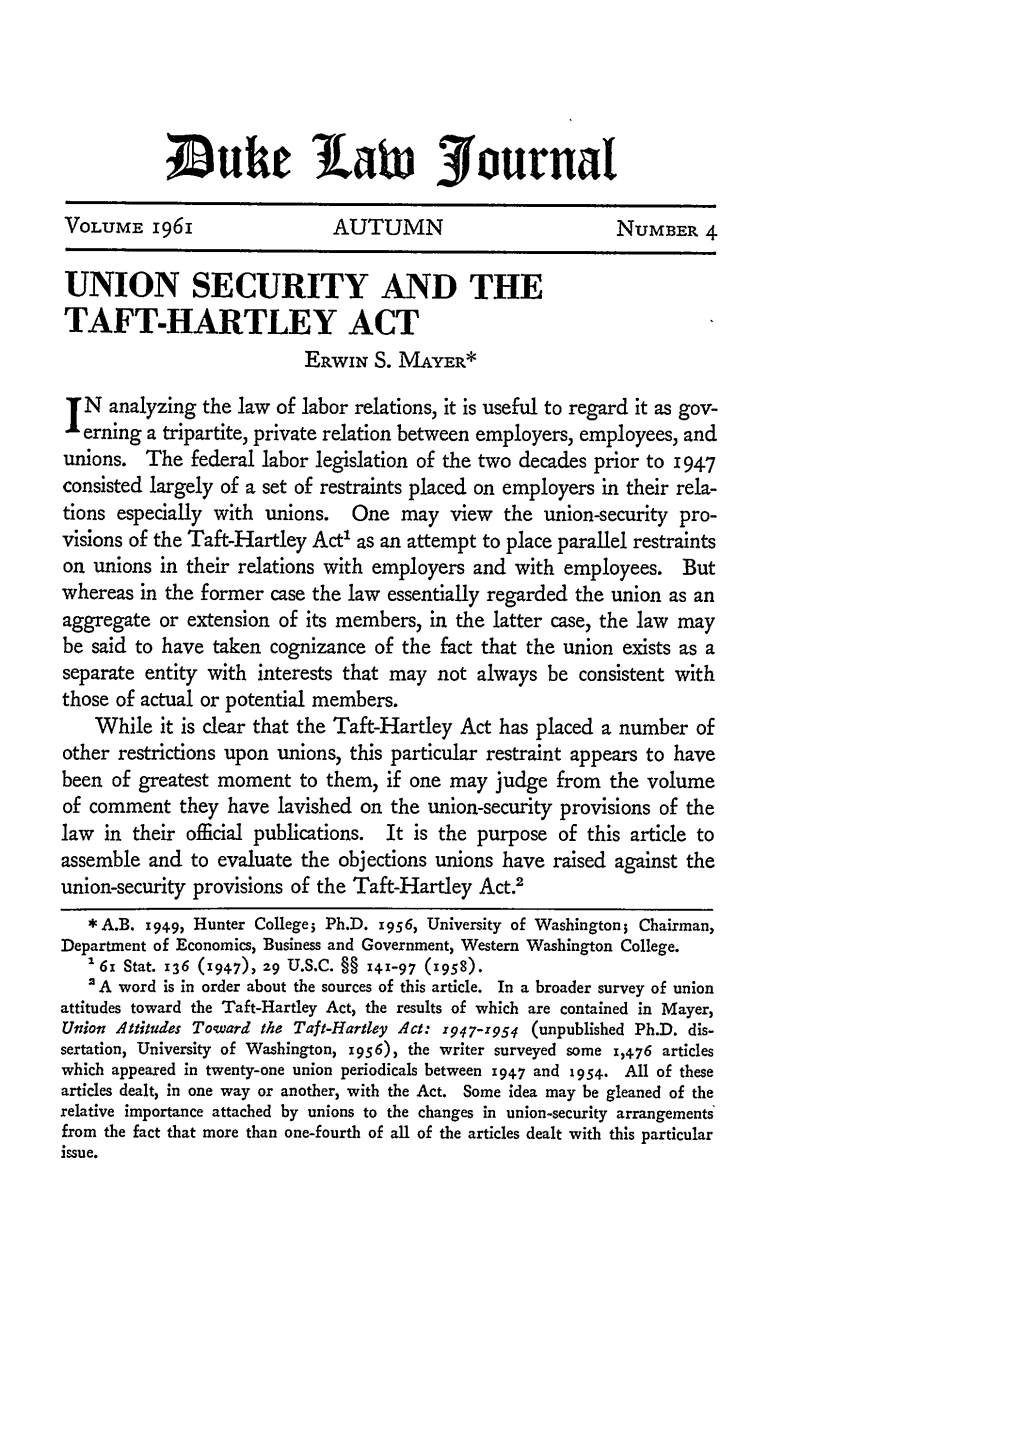 Union Security and the Taft-Hartley Act Erwin S